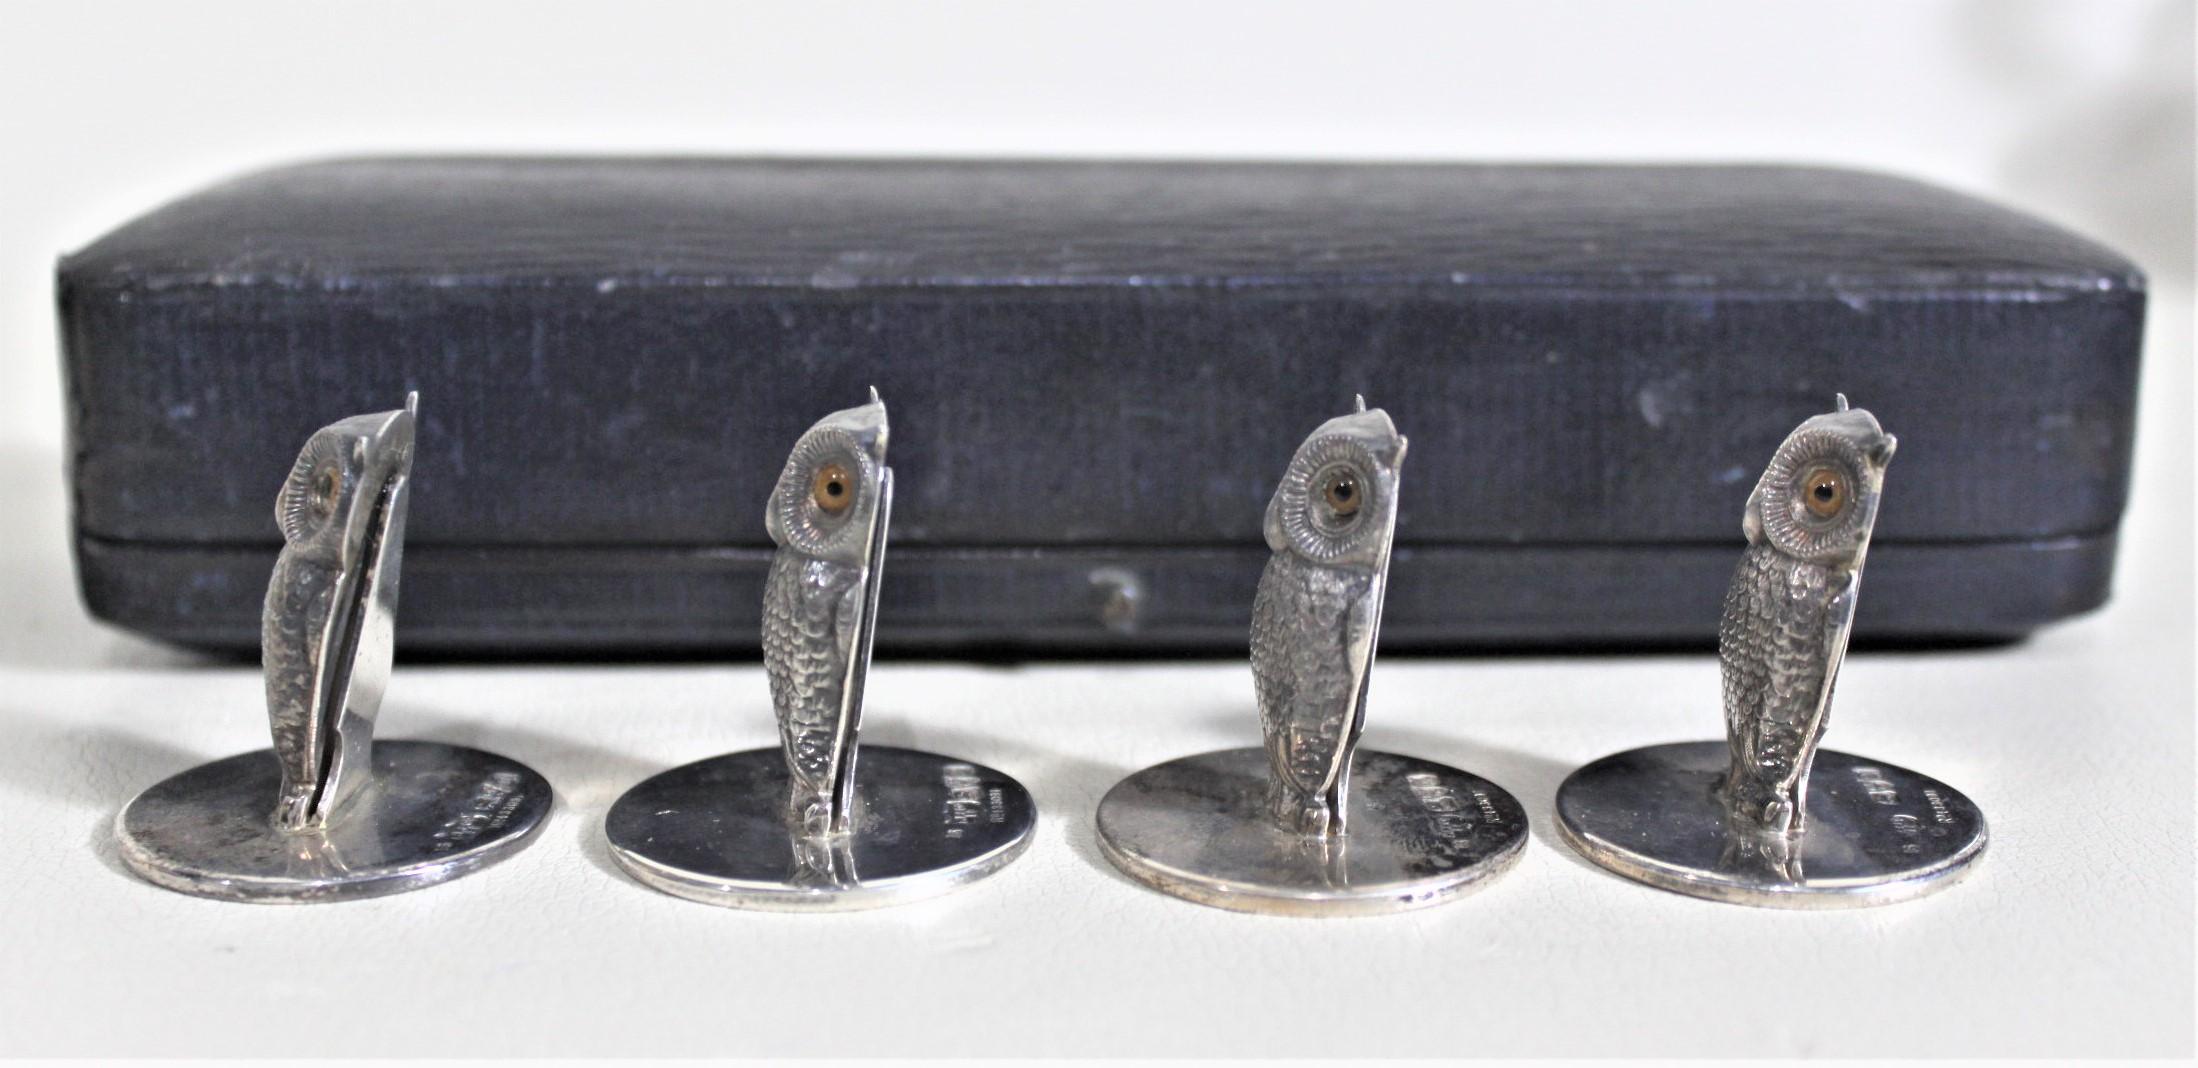 Hand-Crafted Four Antique Sterling Silver Figural Owl Place Card or Menu Holder Set with Box